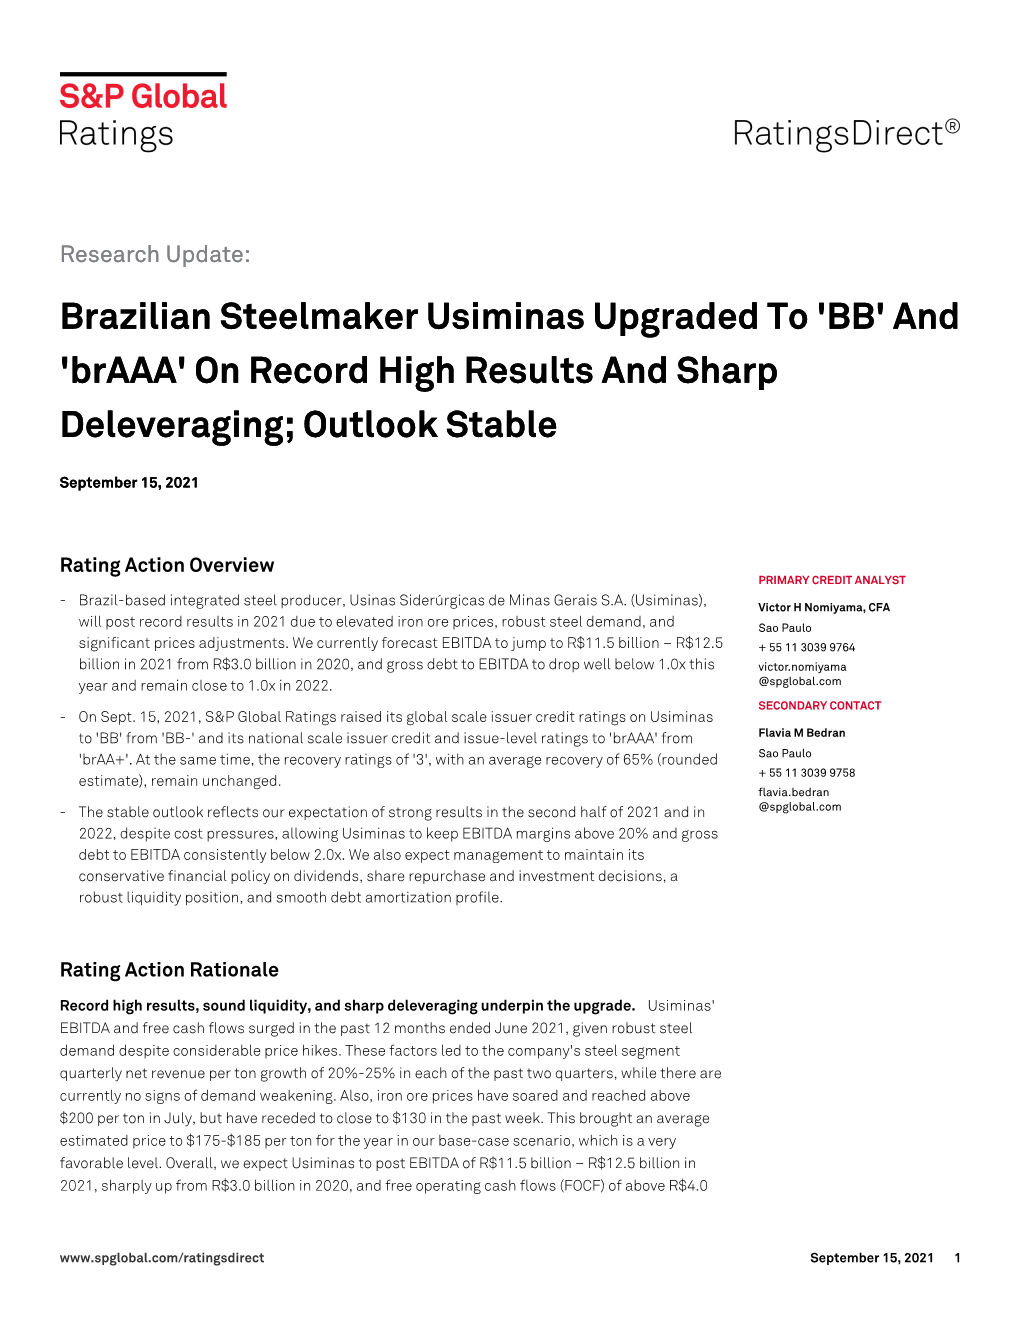 Brazilian Steelmaker Usiminas Upgraded to 'BB' and 'Braaa' on Record High Results and Sharp Deleveraging; Outlook Stable